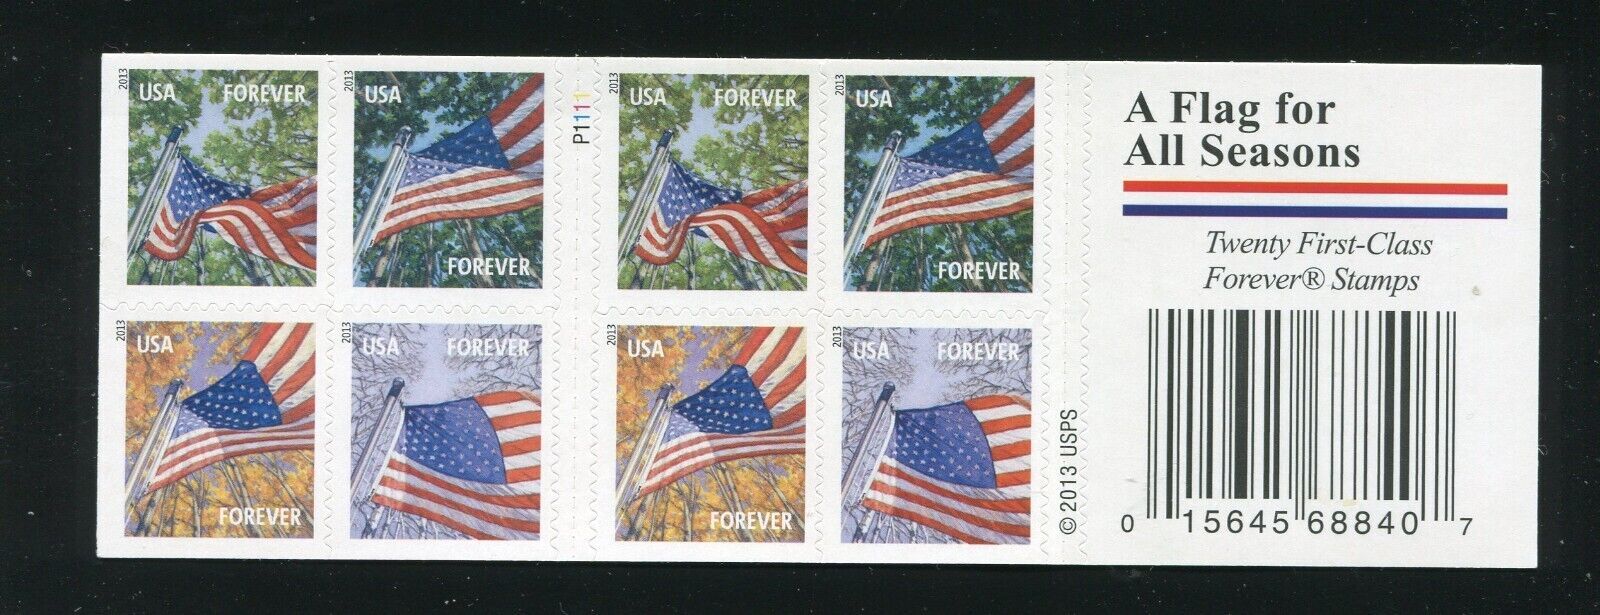 4774 - 2013 First-Class Forever Stamp - A Flag for All Seasons